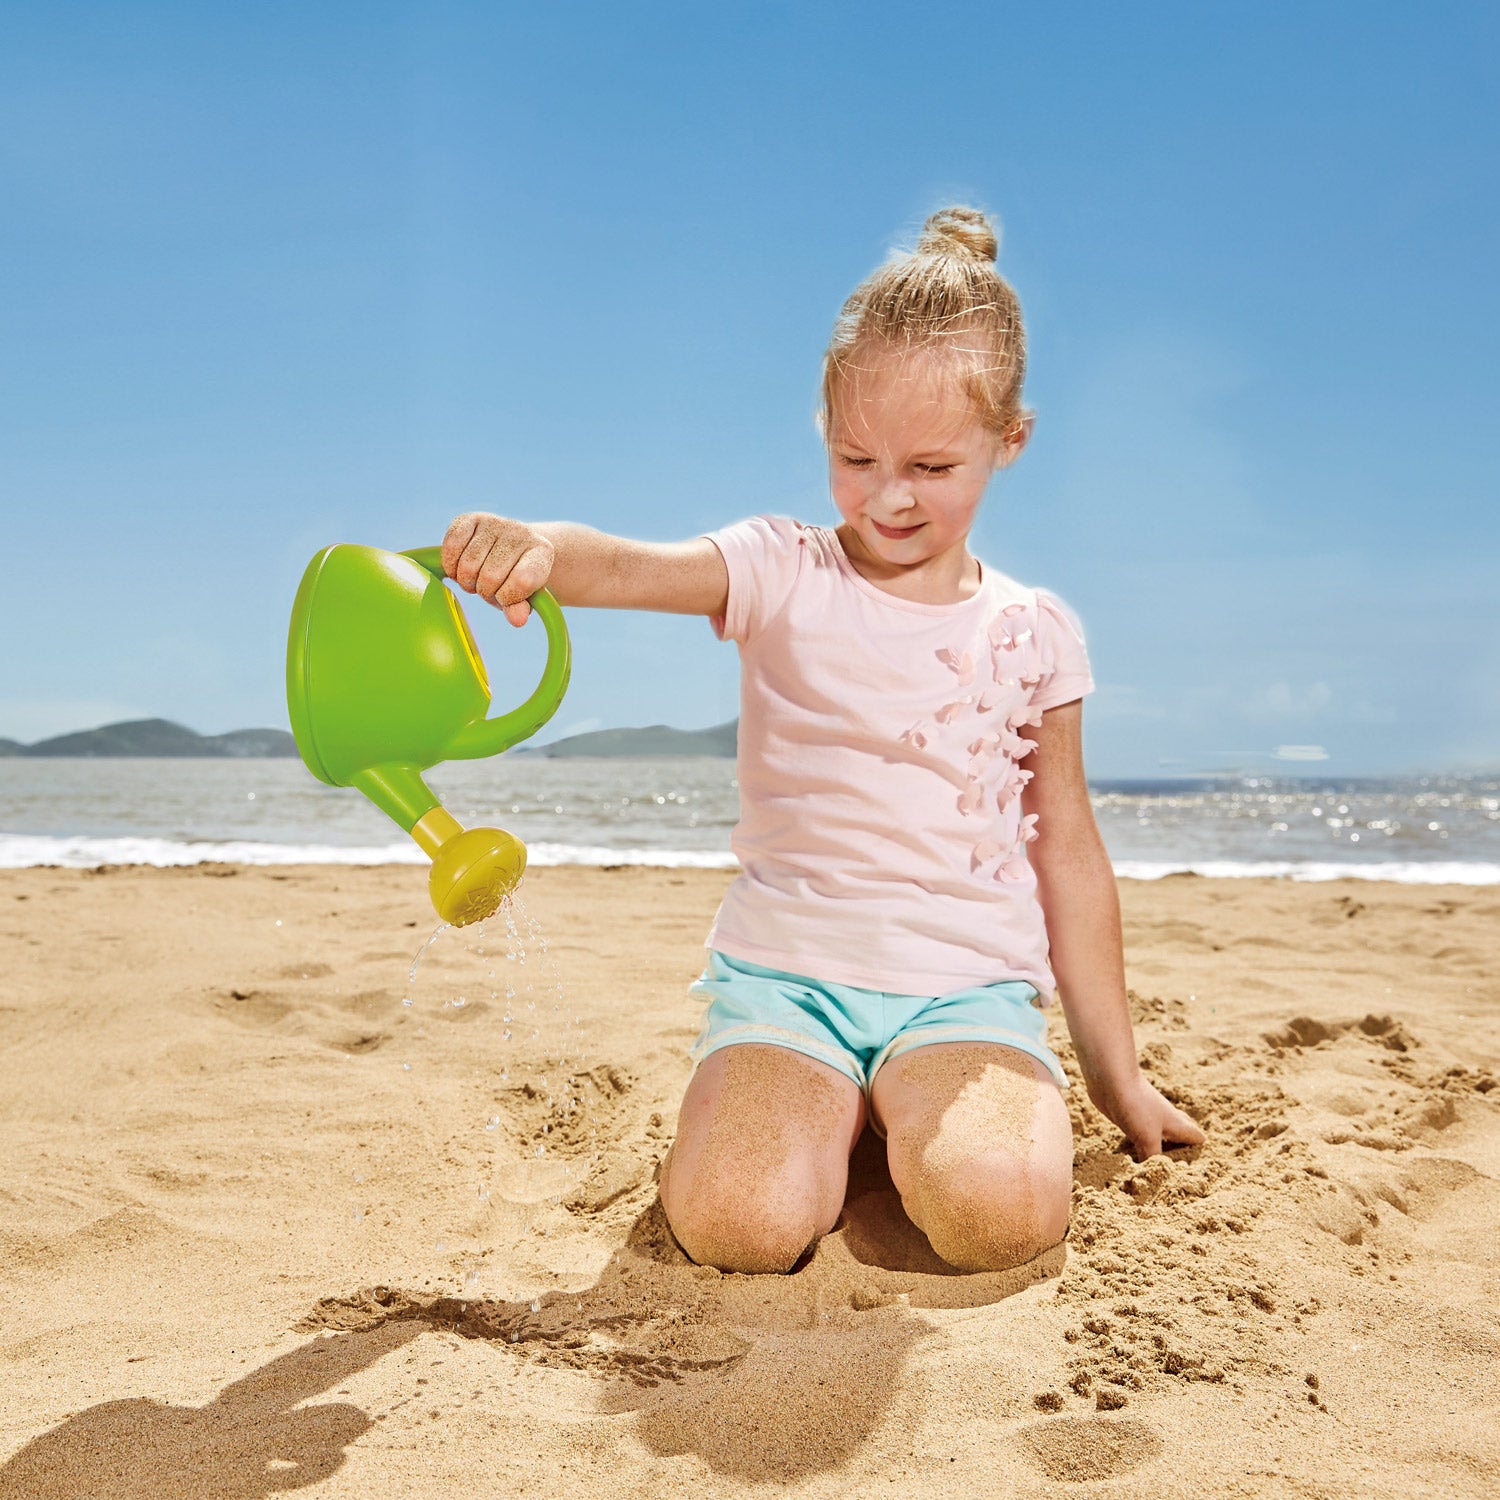 Hape Watering Can - Green perfect for the sand or backyard play with quality outdoor toys The Toy Wagon